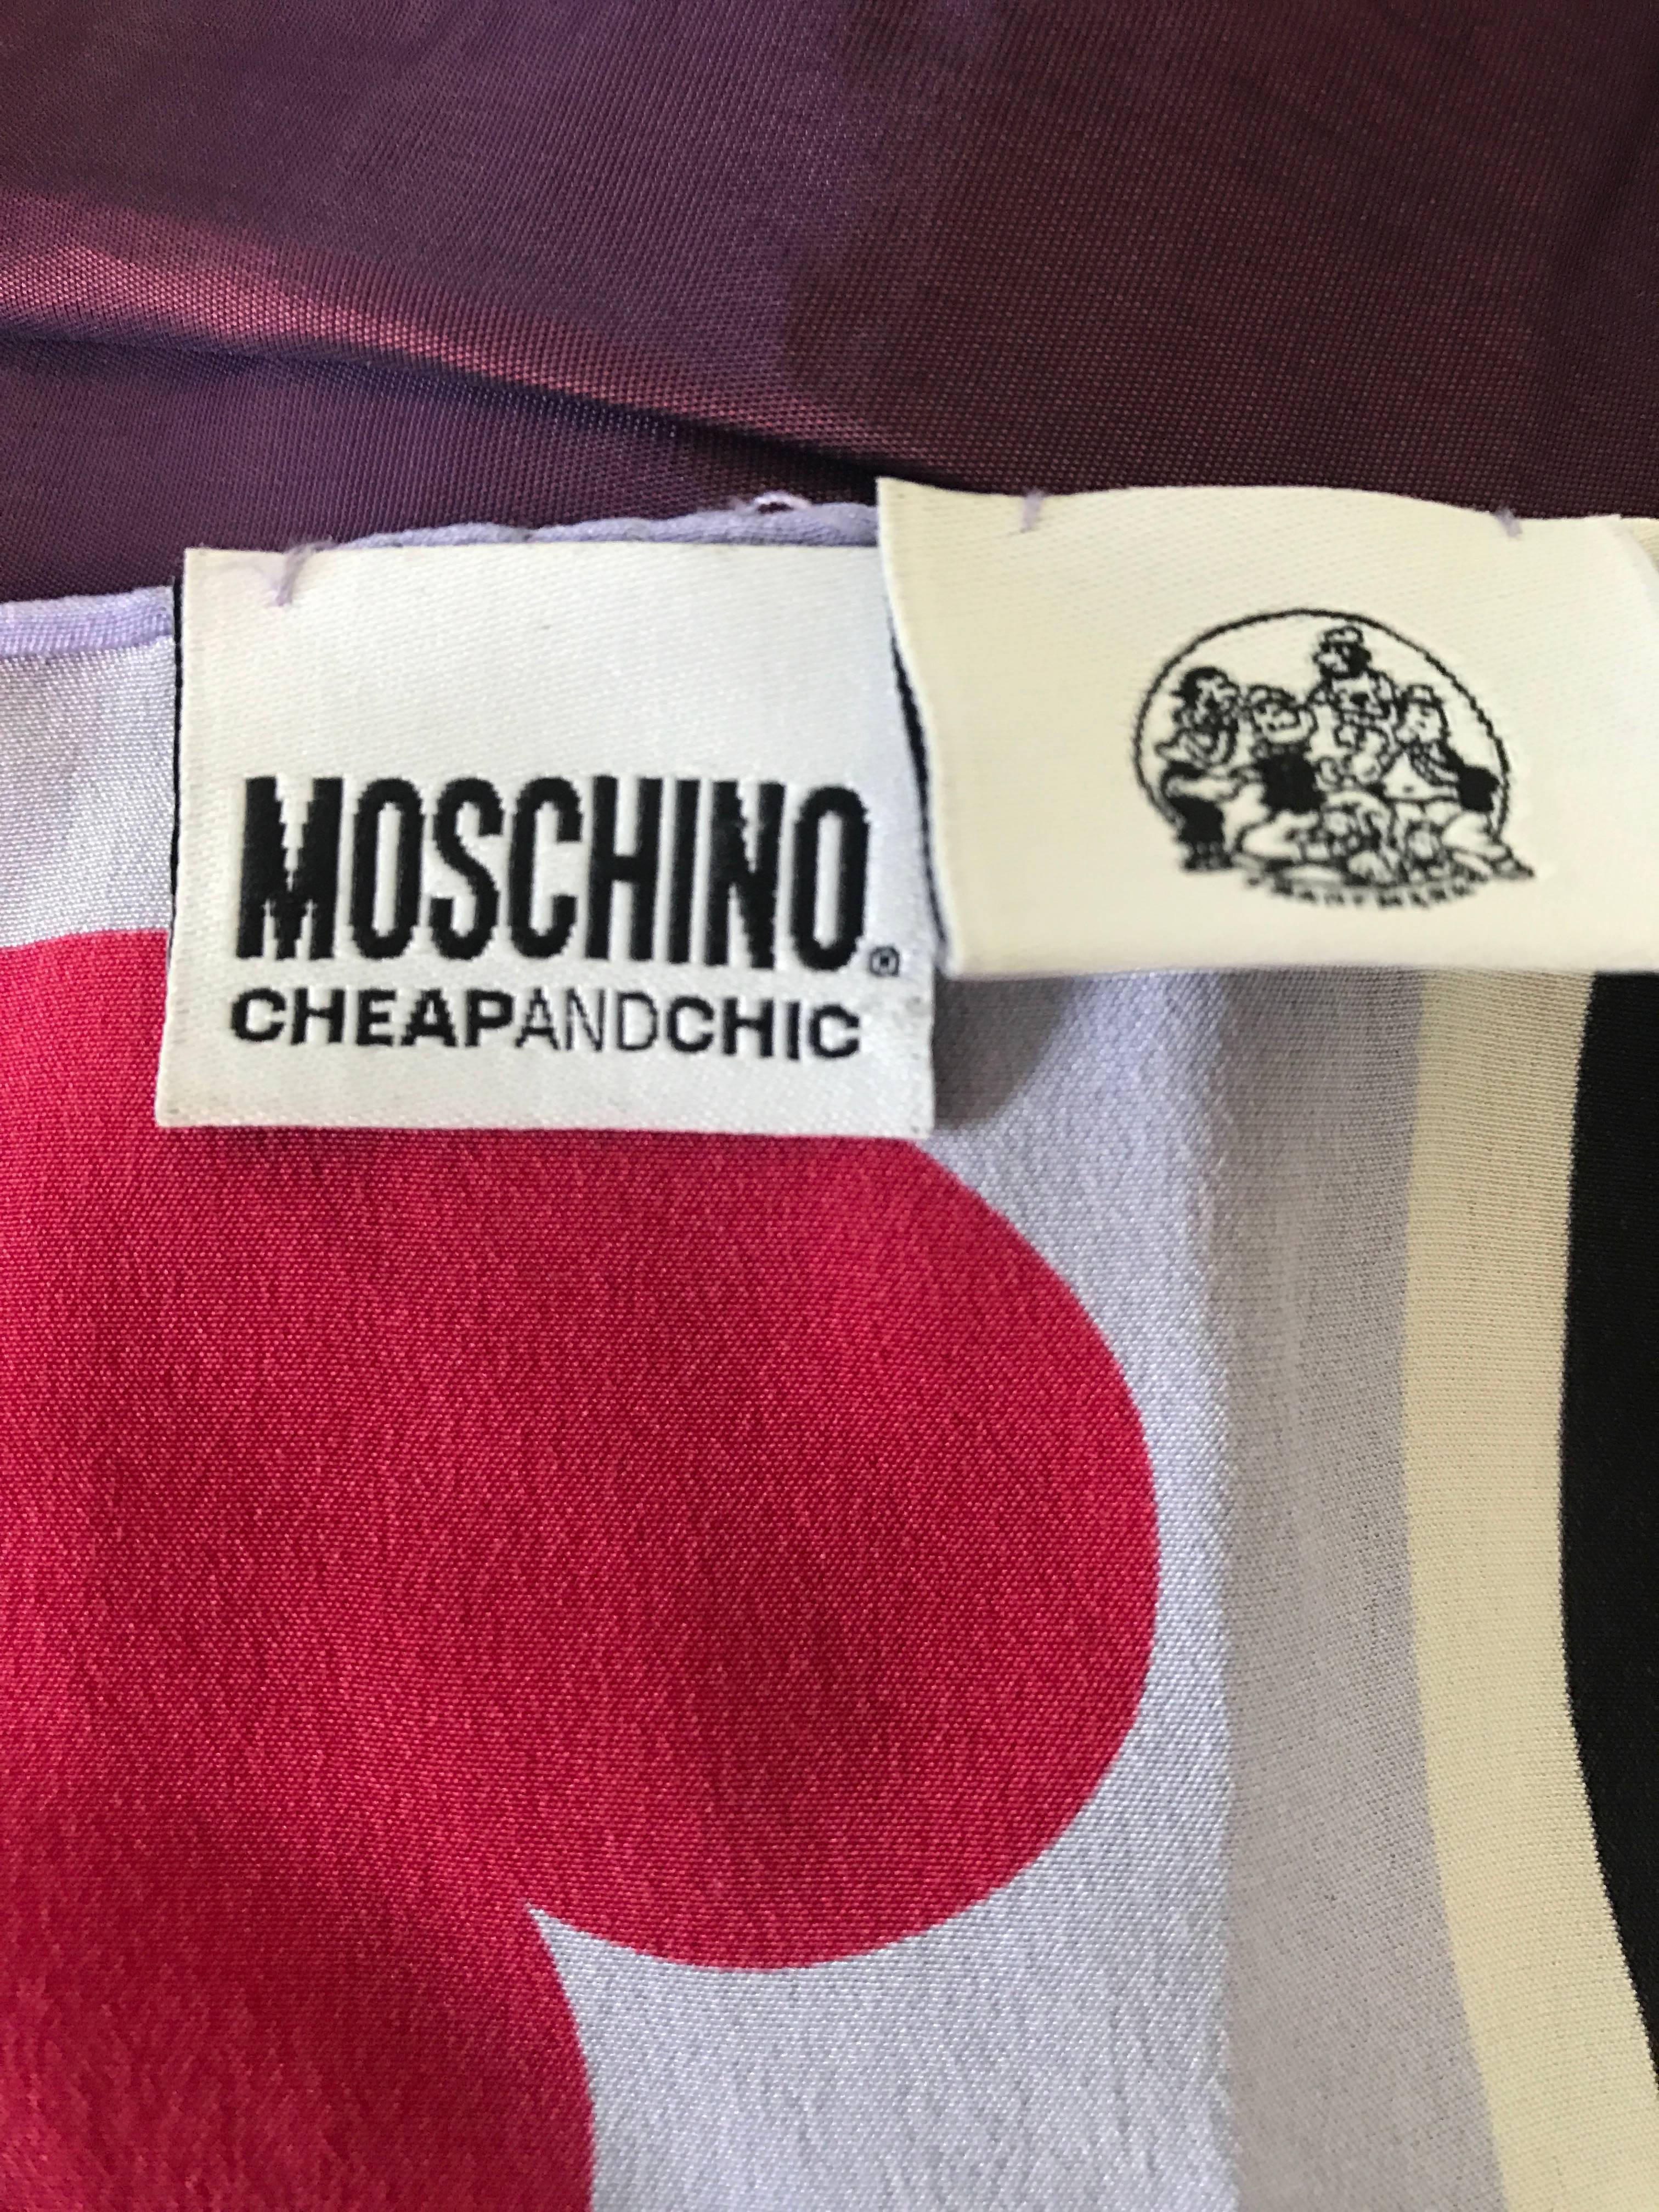 Rare Vintage Moschino Cheap and Chic 1990s Olive Oyl Popeye Silk Novelty Scarf  2